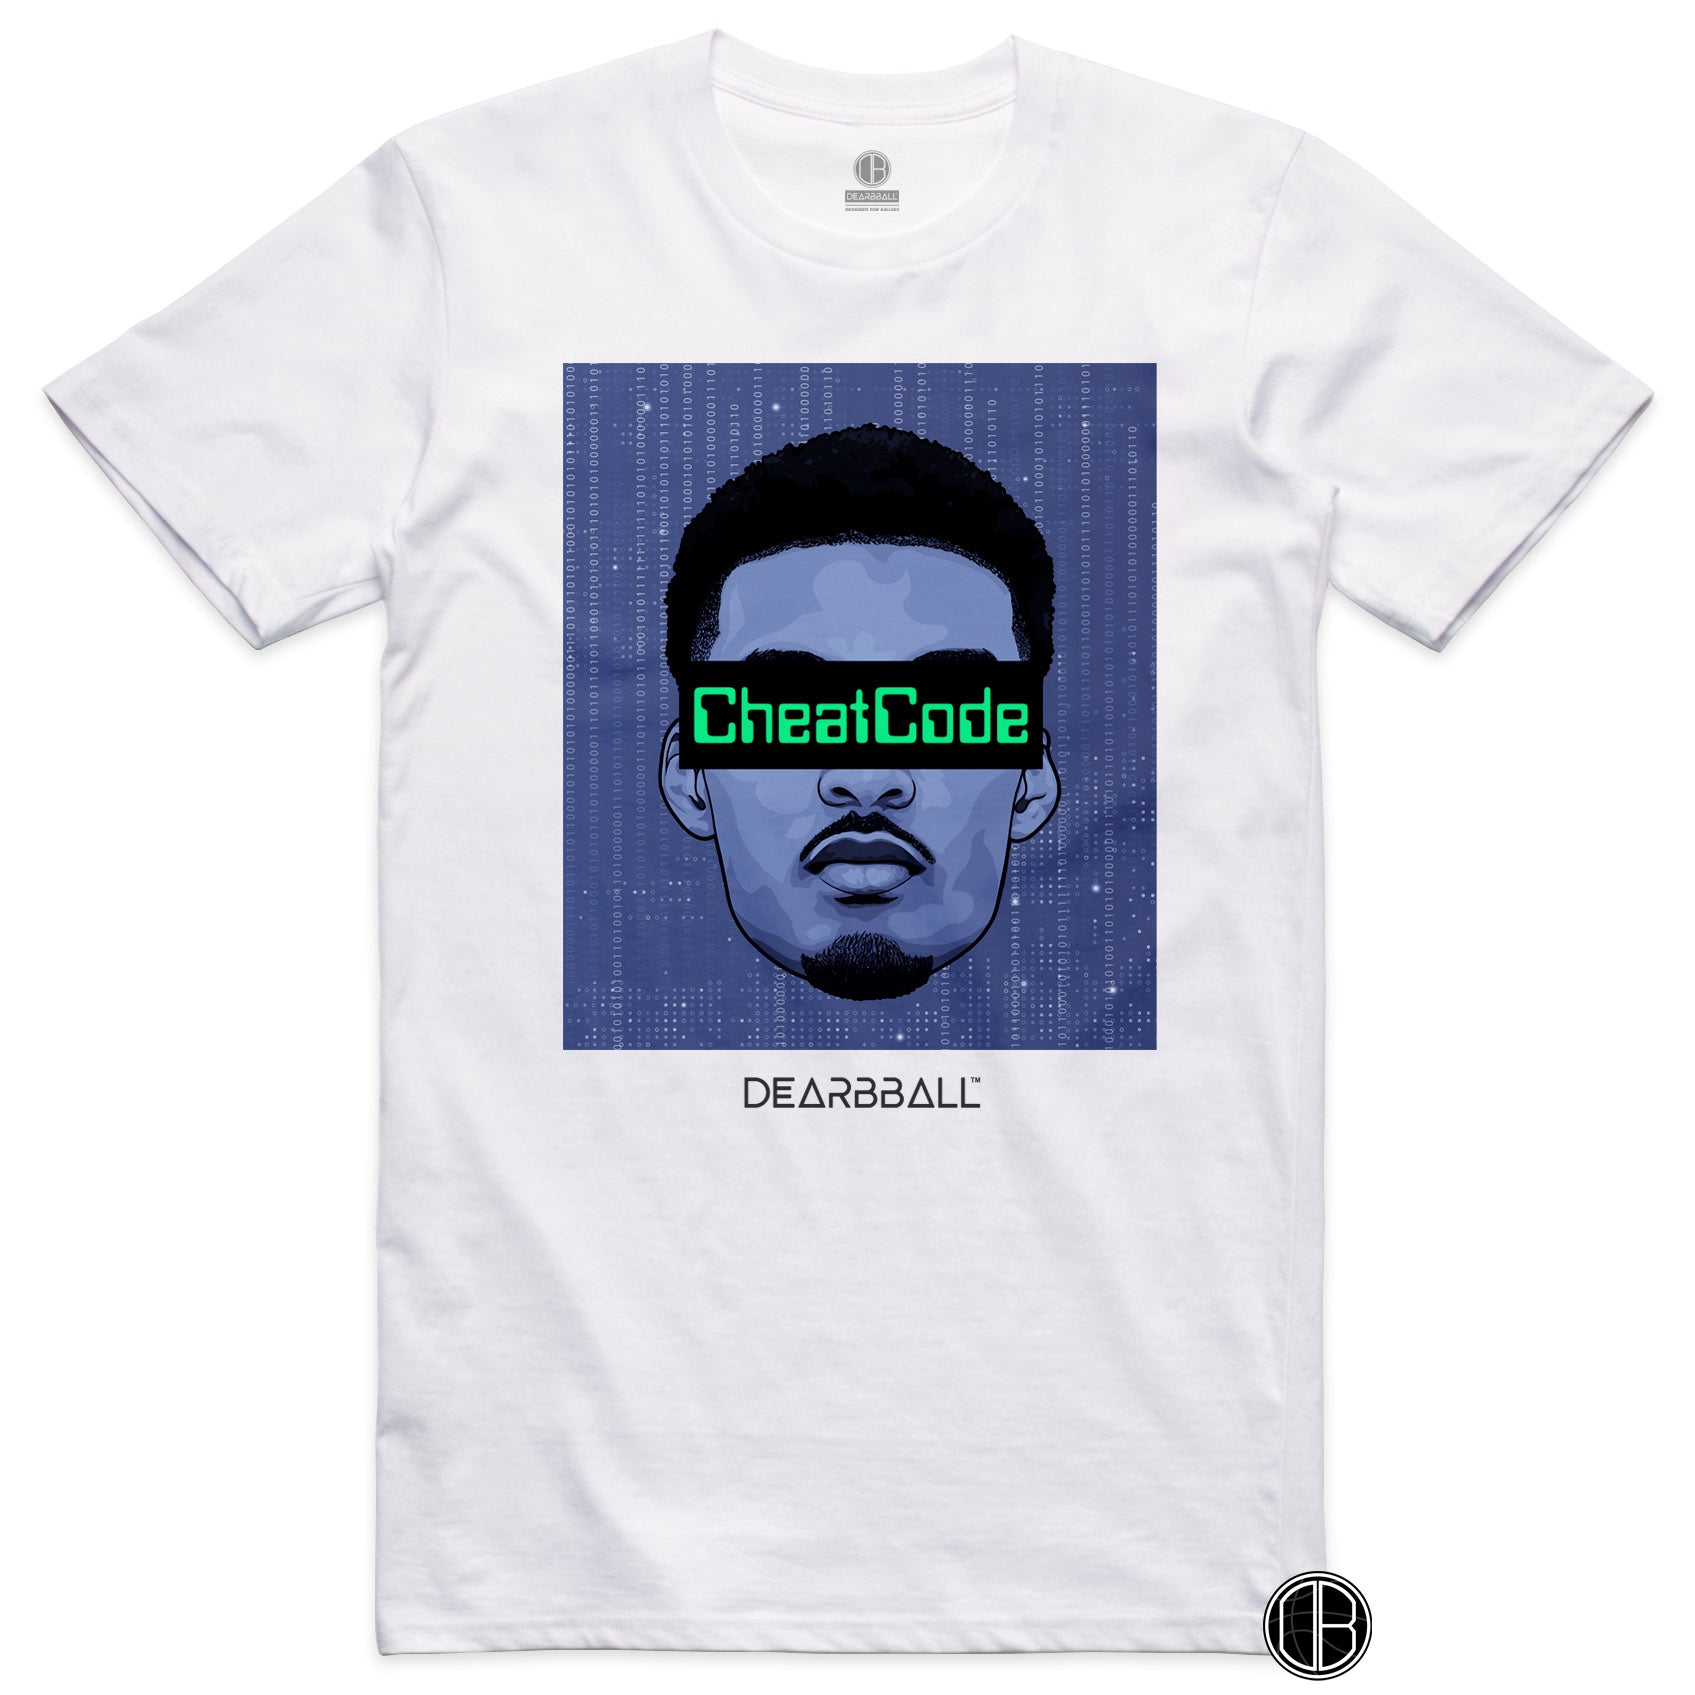 DearBBall T-Shirt - CheatCode Limited Edition